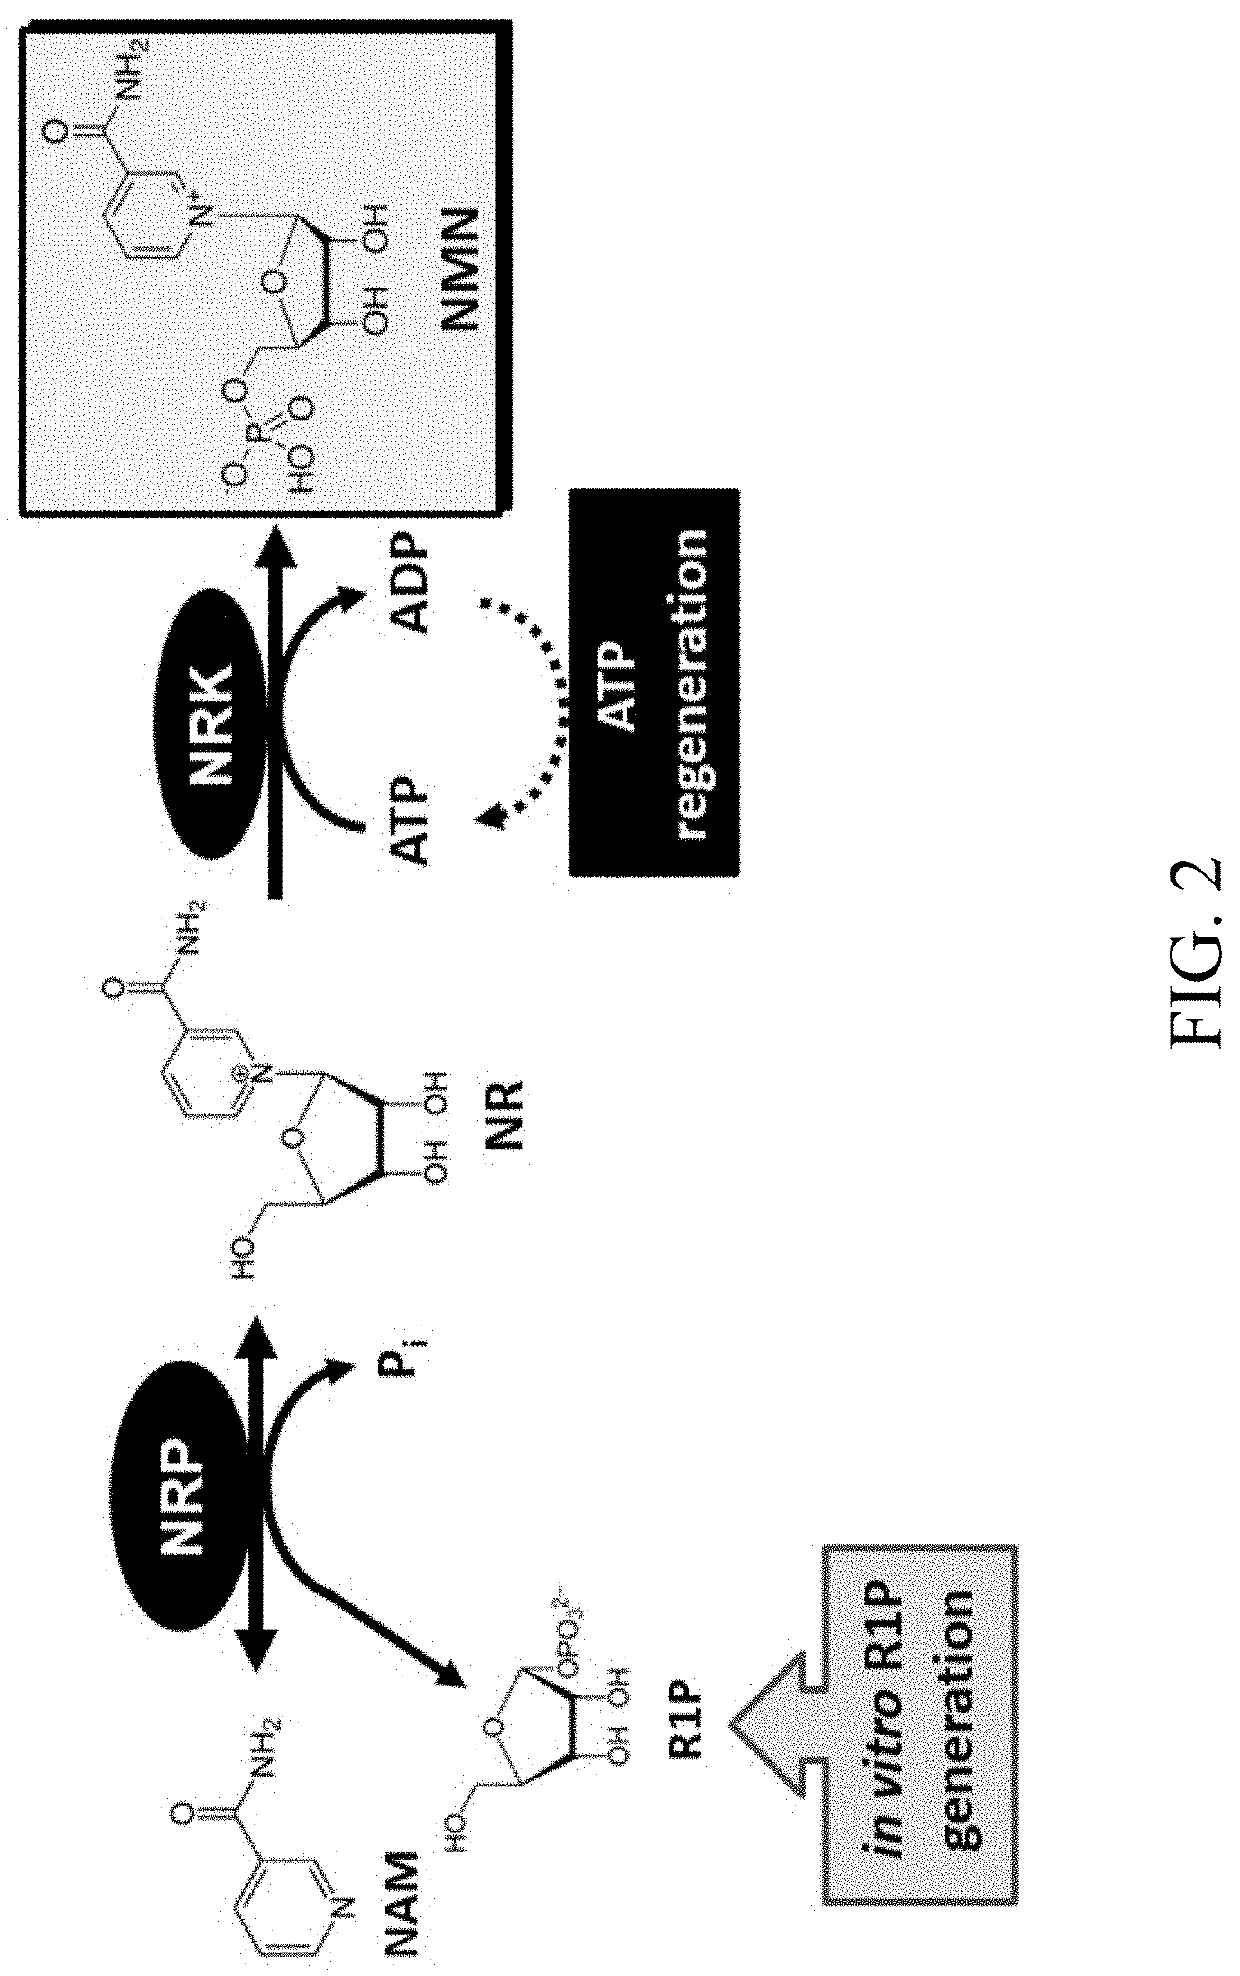 Biosynthesis of preparing nicotinamide mononucleotide and derivatives thereof